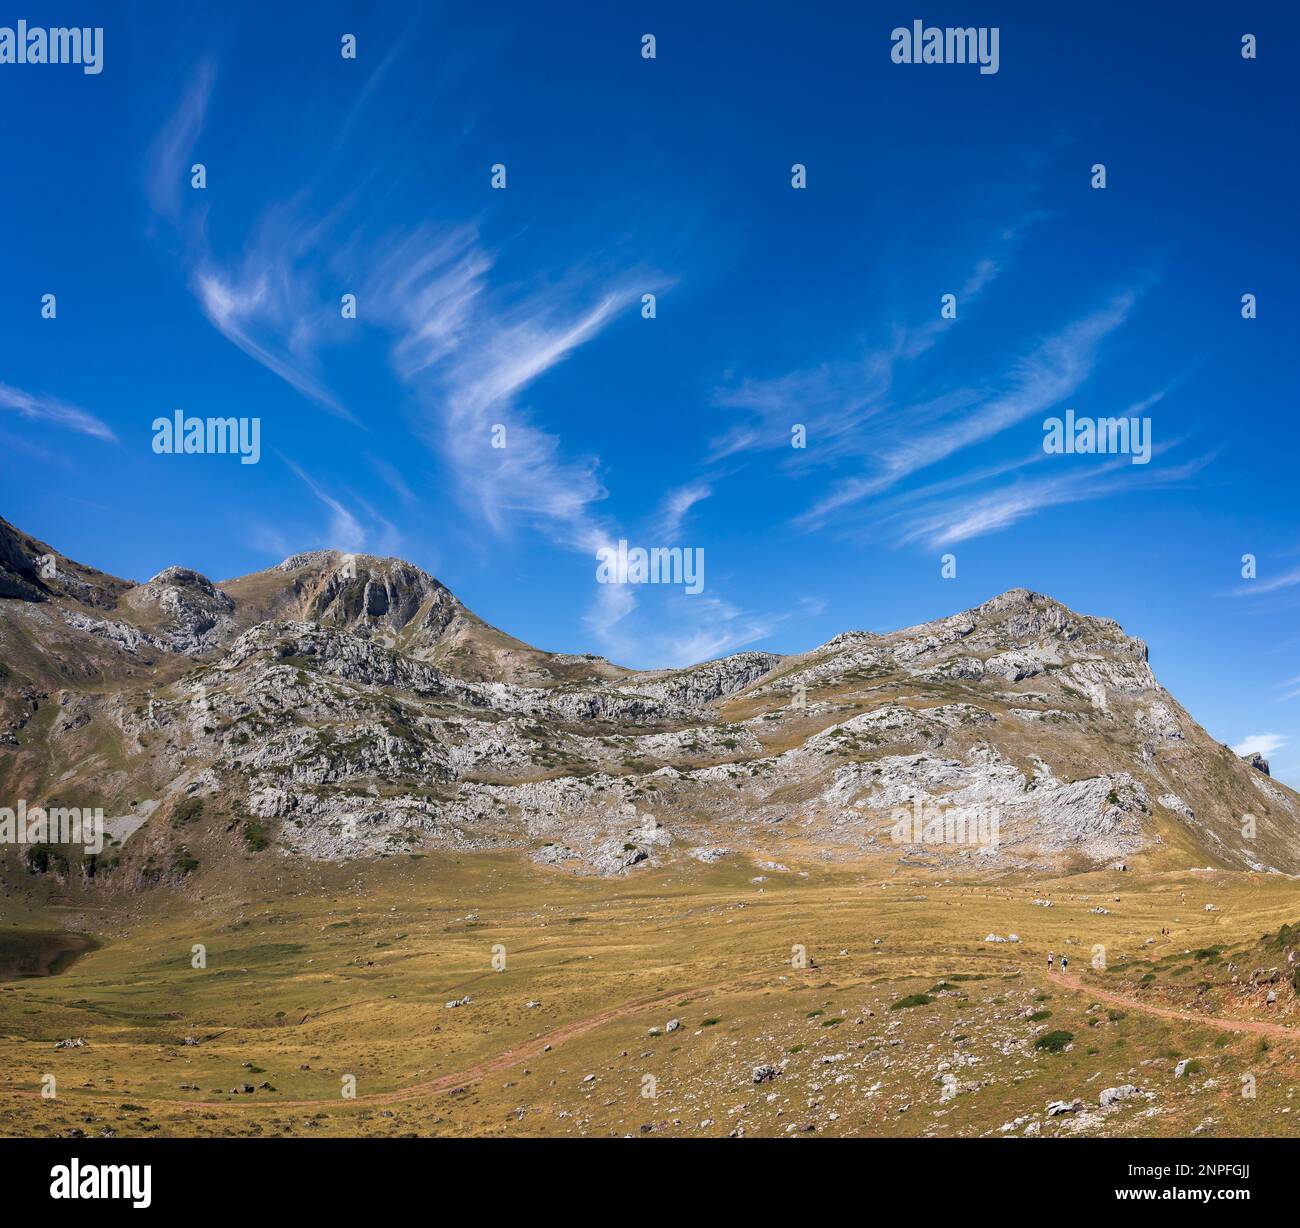 A majestic mountain range in Somiedo Natural Park, Asturias surrounded by blue skies and fluffy clouds - a stunning example of natures beauty. Stock Photo